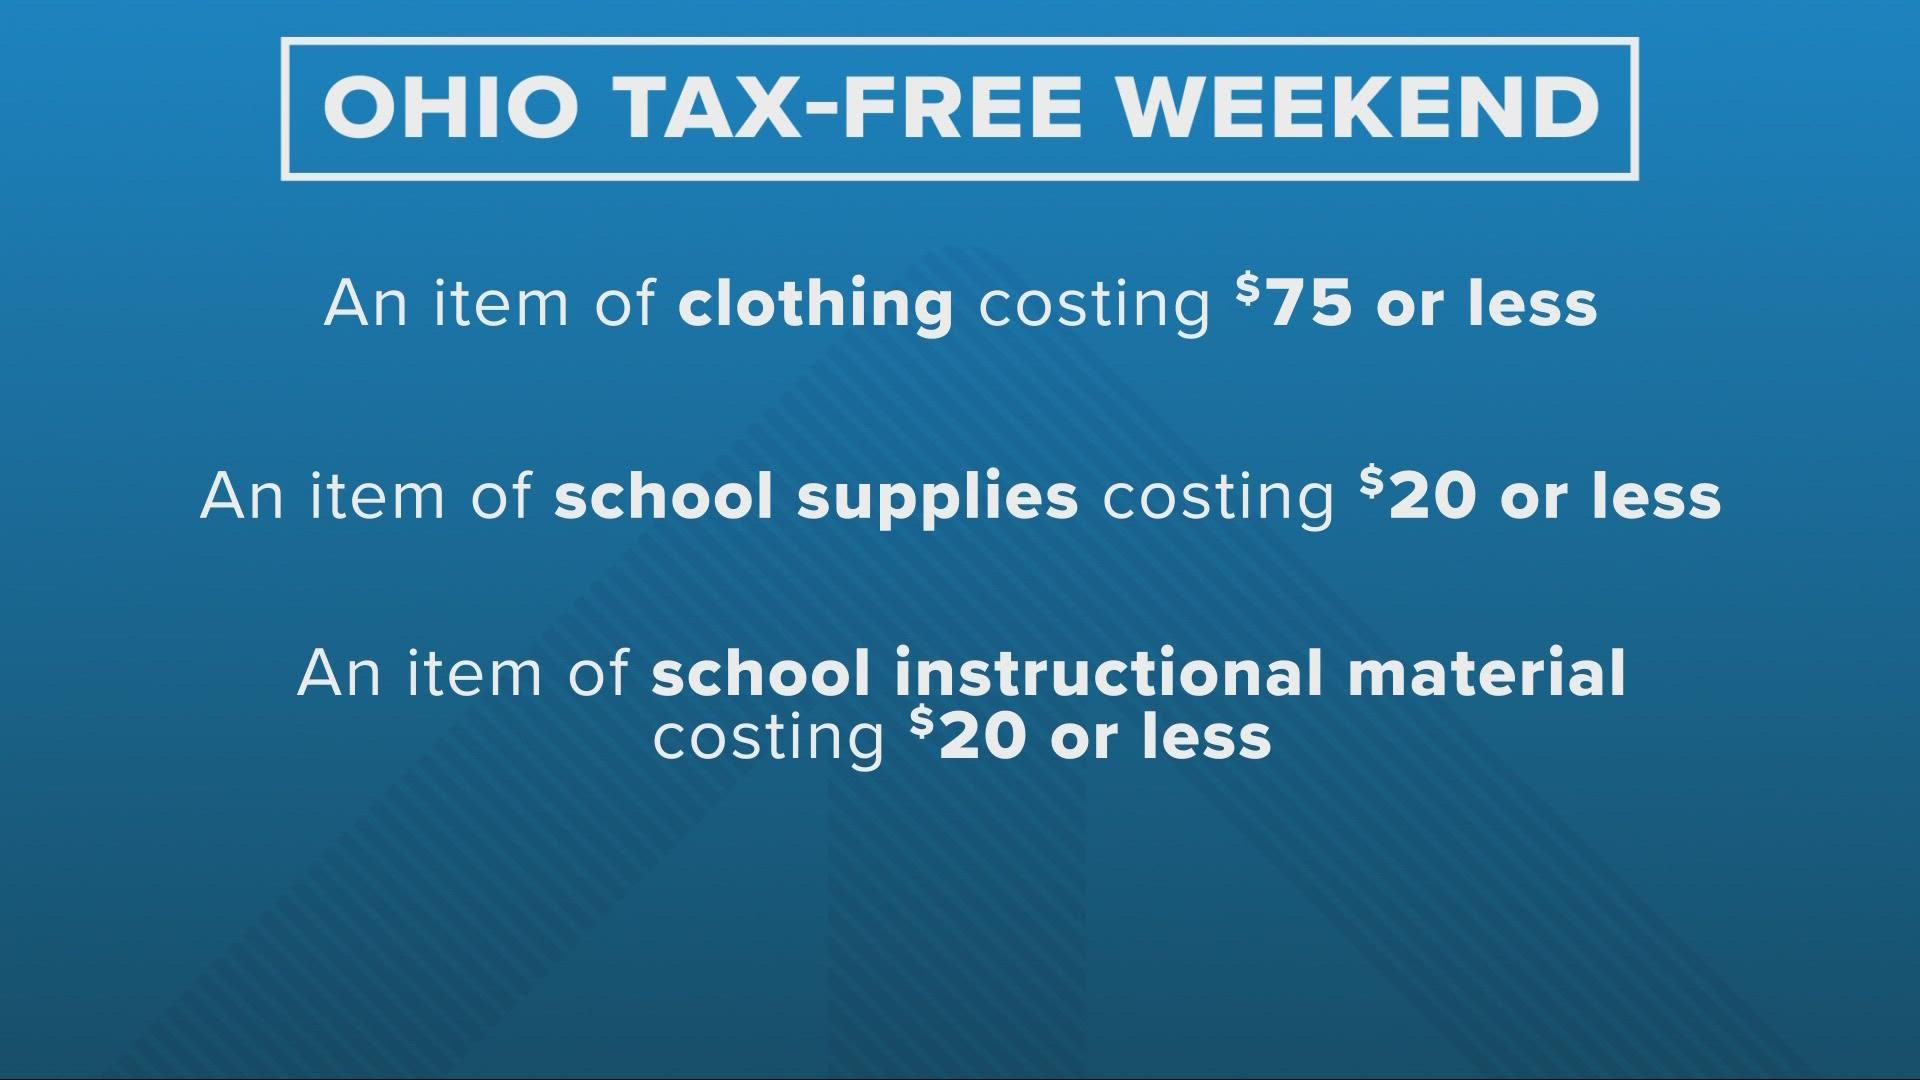 It's back! Ohio's tax-free weekend is underway from August 5-7 to help you save some money.